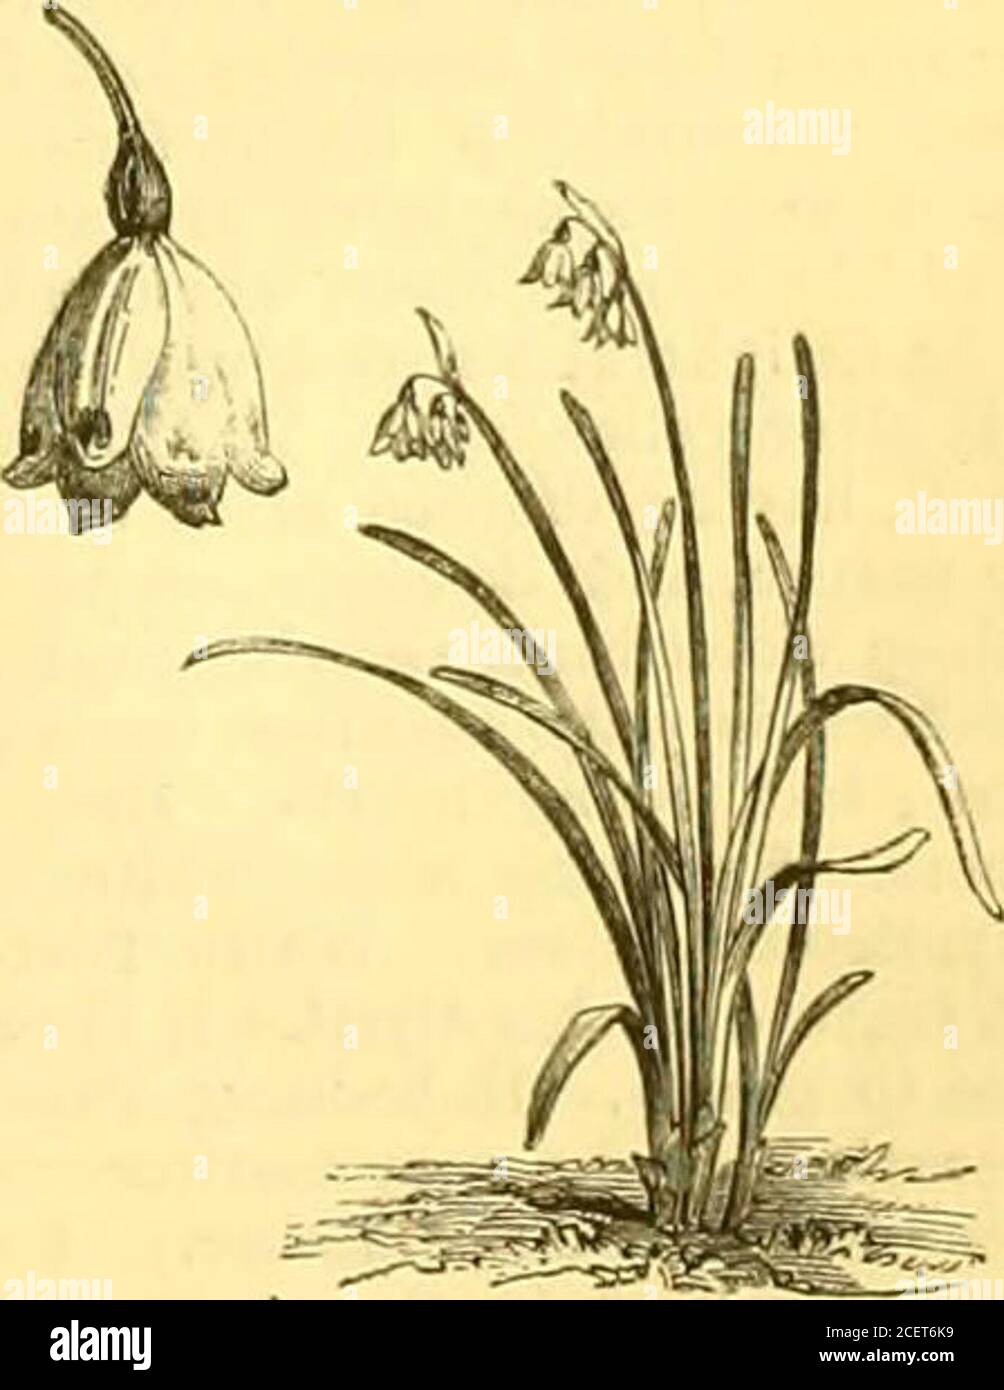 . The Garden : an illustrated weekly journal of gardening in all its branches. Swecl-aceuted Narcissus.. Polyanthus Narcissus. The Crown Imperial. Summer Snowflake. SOME HARDY FLOWERS OF THE WEEK IN LONDON GARDENS. 334 THE GARDEN. [AiuiL 8, 1876. {Draba aizoides) is conspicuous; and among herbaceous plantsDoiouicum austriacum is the most showy. In the bulb class,the modest yellow and green Gagca fascicularis is noticeable inthe Fulbam Nurseries, where also the cuinous PodophyllumKmodi is sending up its flower-stems. DISTILLING THE BLOOMS OF FLOWERS.In The Gaudex of March 25 (p. 300), F. W. C. Stock Photo